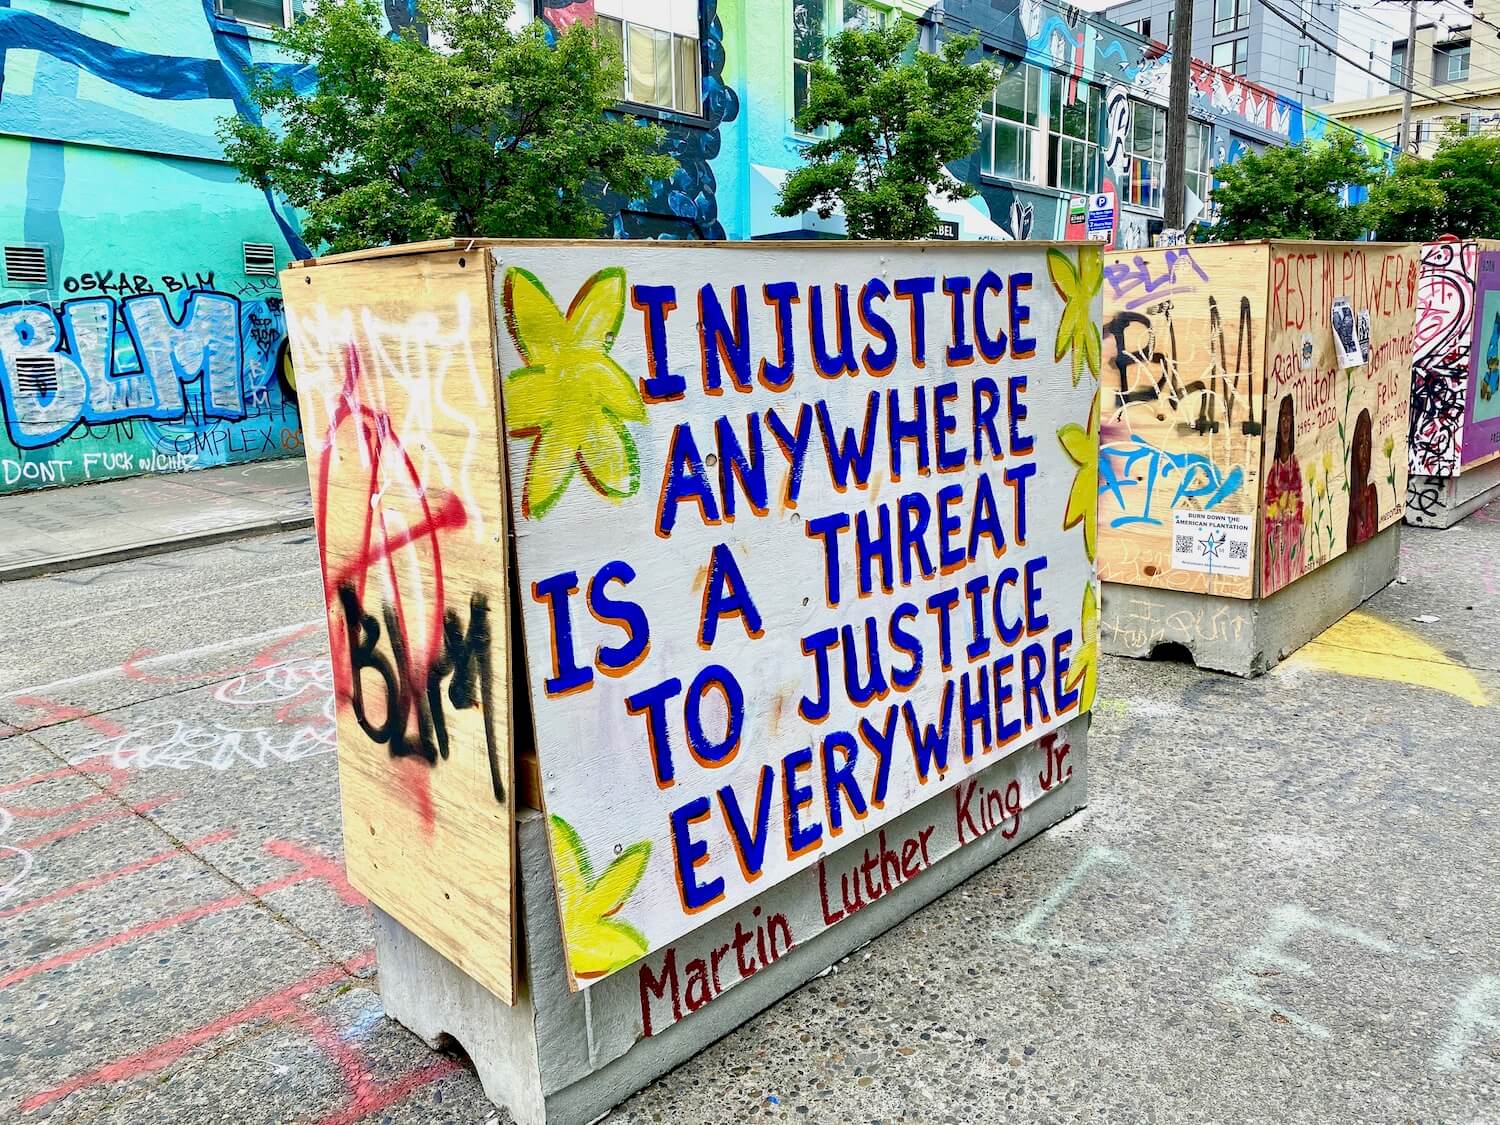 A row of concrete traffic barricades are covered in plywood and painted with a variety of messages. This is in the Black Lives Matter protest area of Capitol Hill in Seattle. This sign says, Injustice anywhere is a threat to justice everywhere, a quote by Martin Luther King Jr.